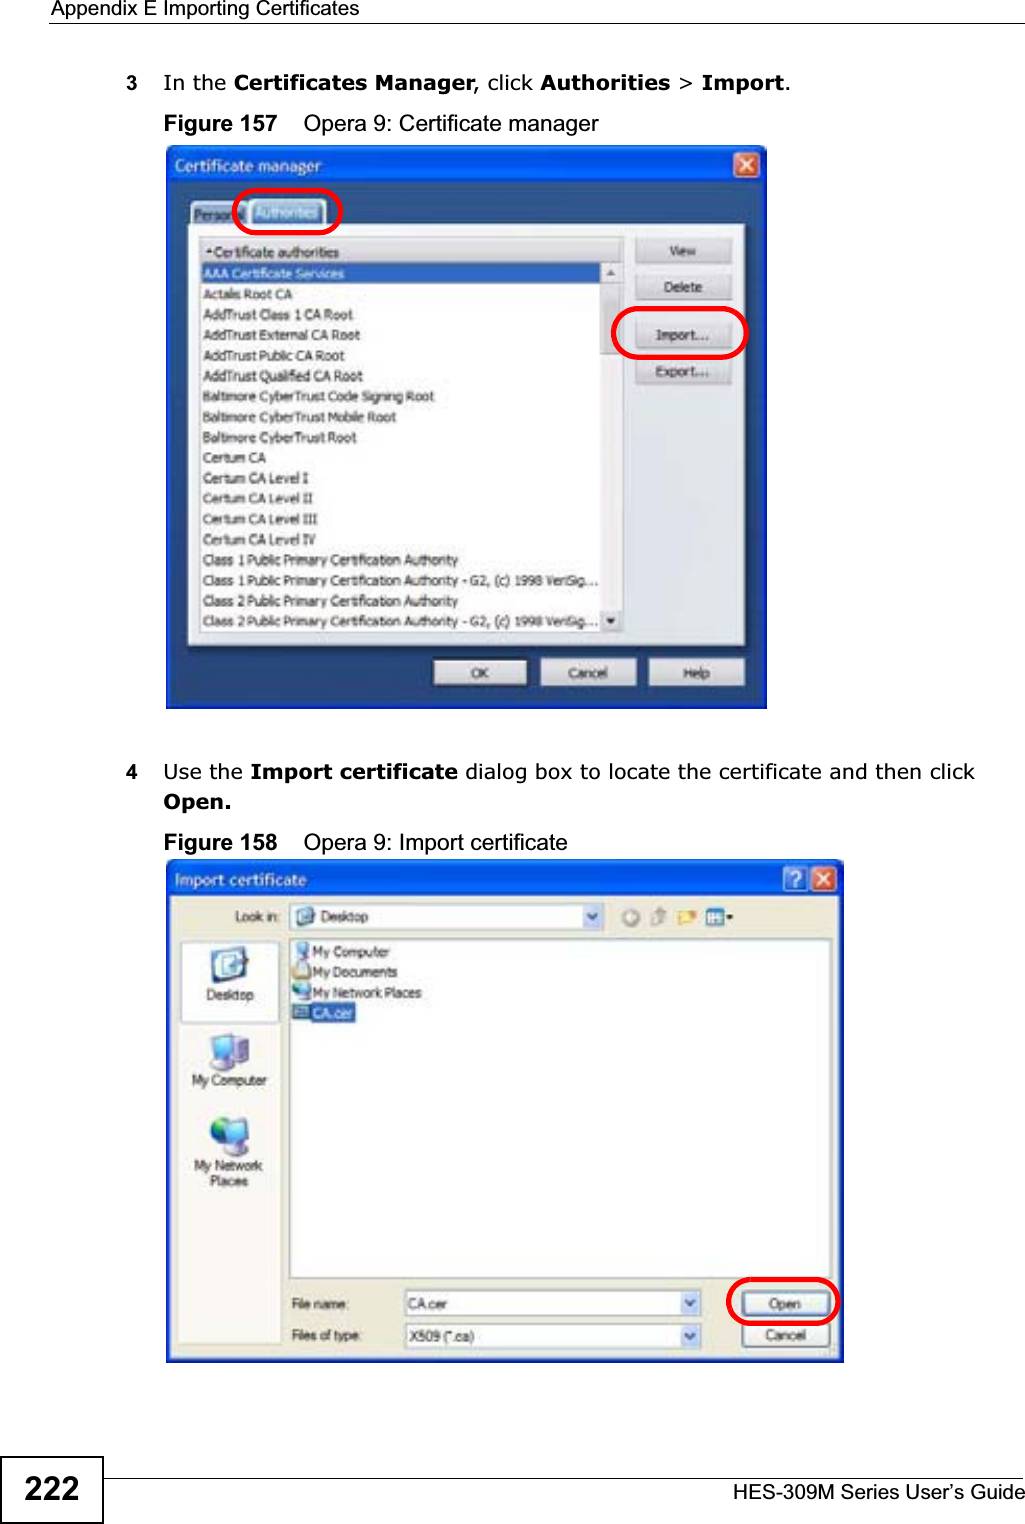 Appendix E Importing CertificatesHES-309M Series User’s Guide2223In the Certificates Manager, click Authorities &gt; Import.Figure 157    Opera 9: Certificate manager4Use the Import certificate dialog box to locate the certificate and then clickOpen.Figure 158    Opera 9: Import certificate